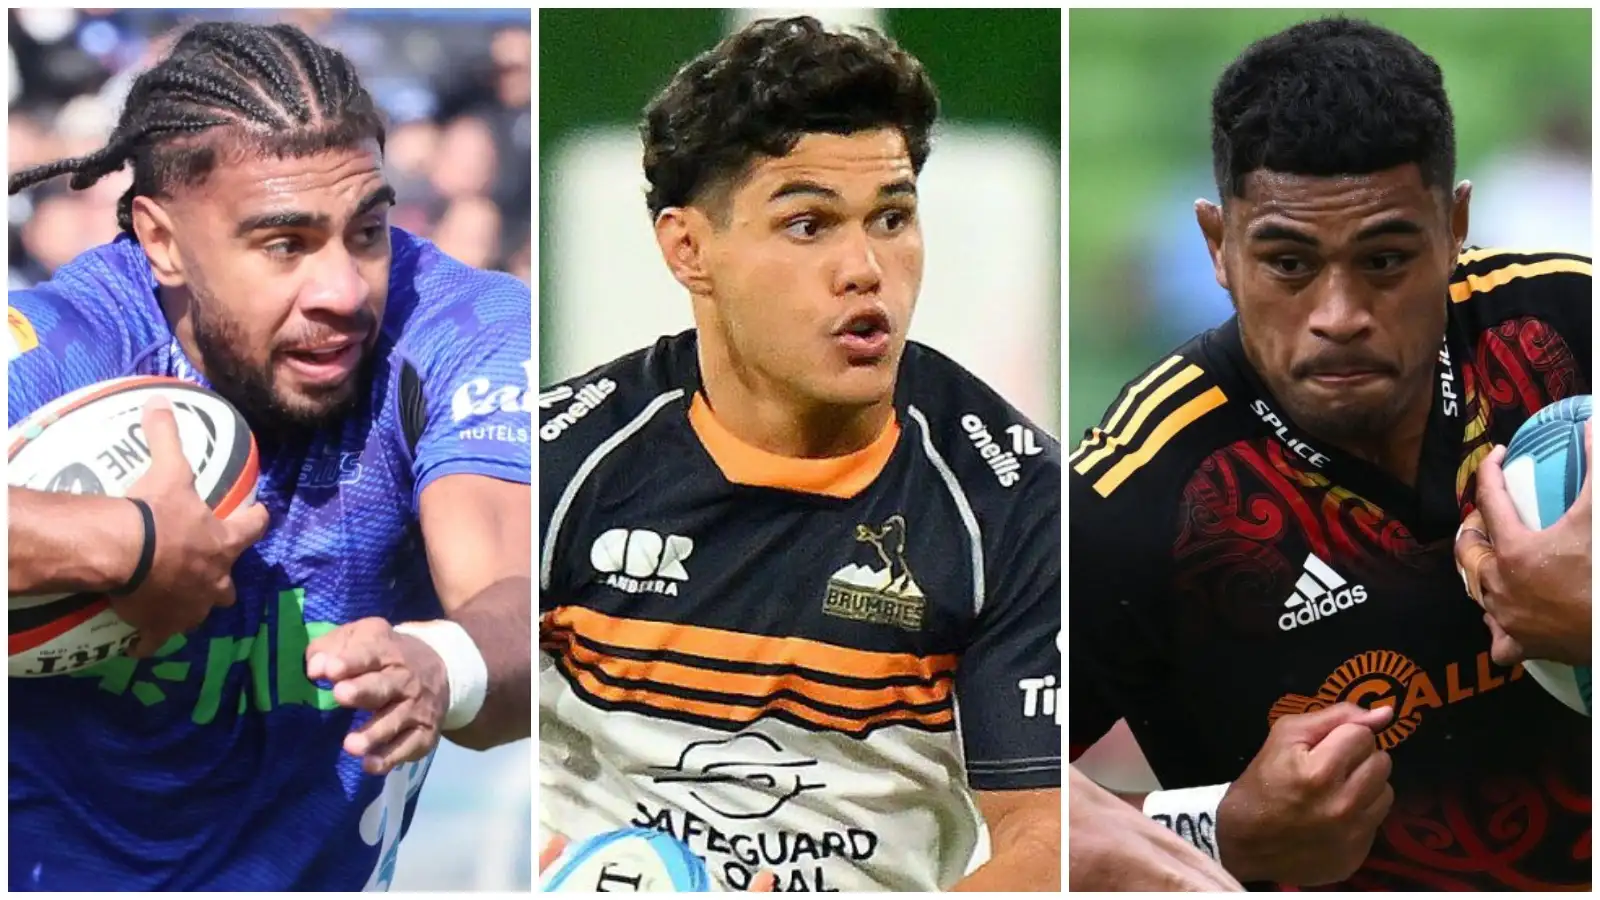 Super Rugby Pacific Team of the Week: Chiefs and Brumbies lead the way after fine victories